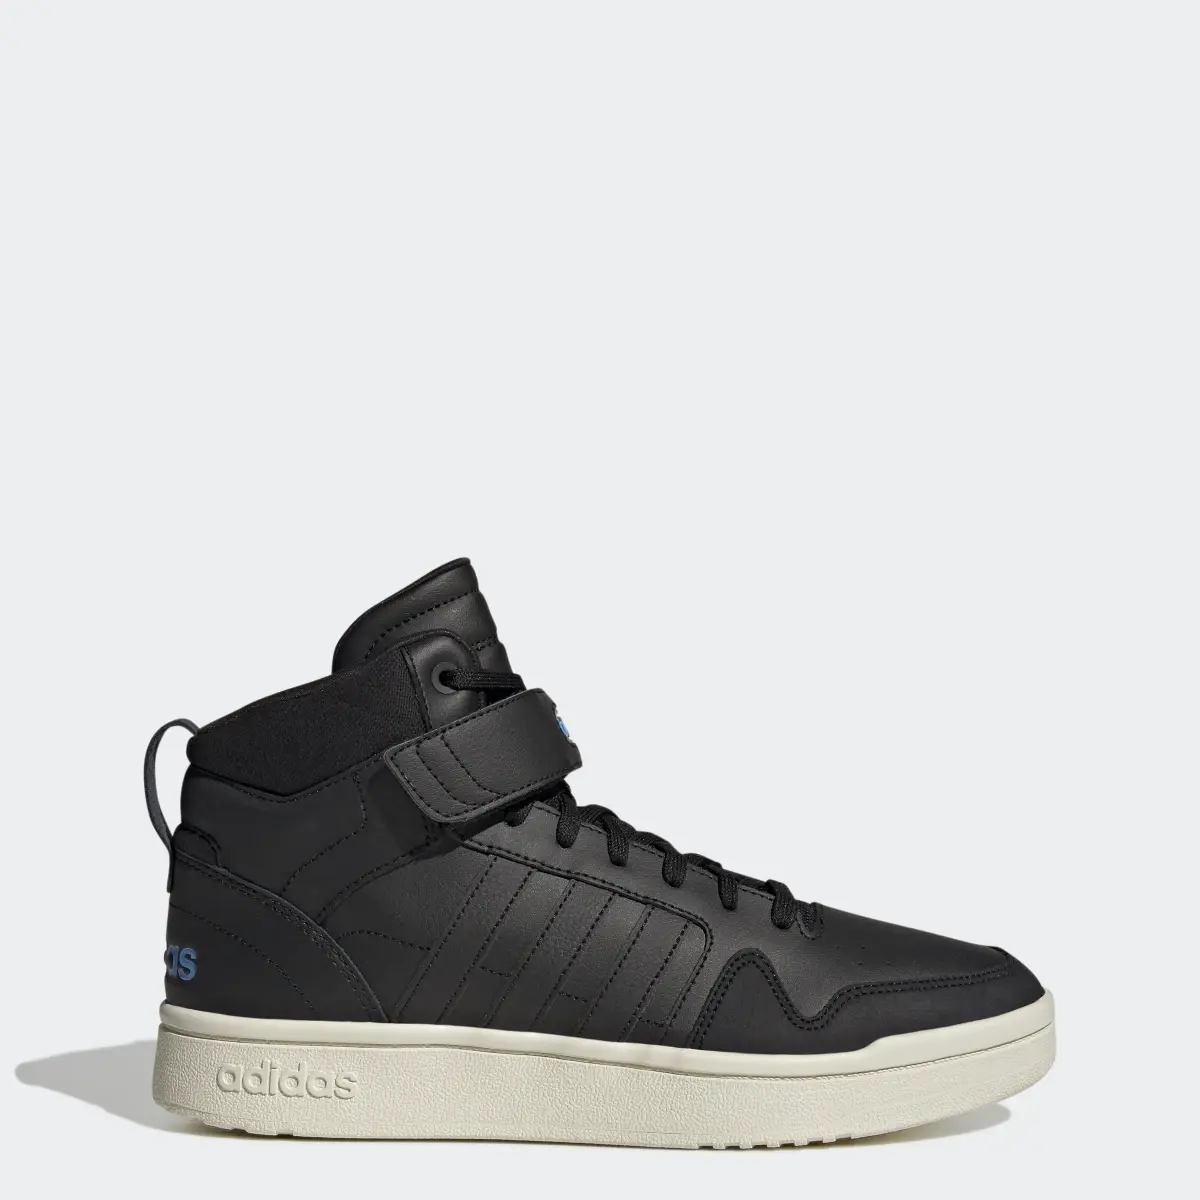 Adidas PostMove Mid Cloudfoam Super Lifestyle Basketball Mid Classic Shoes. 1